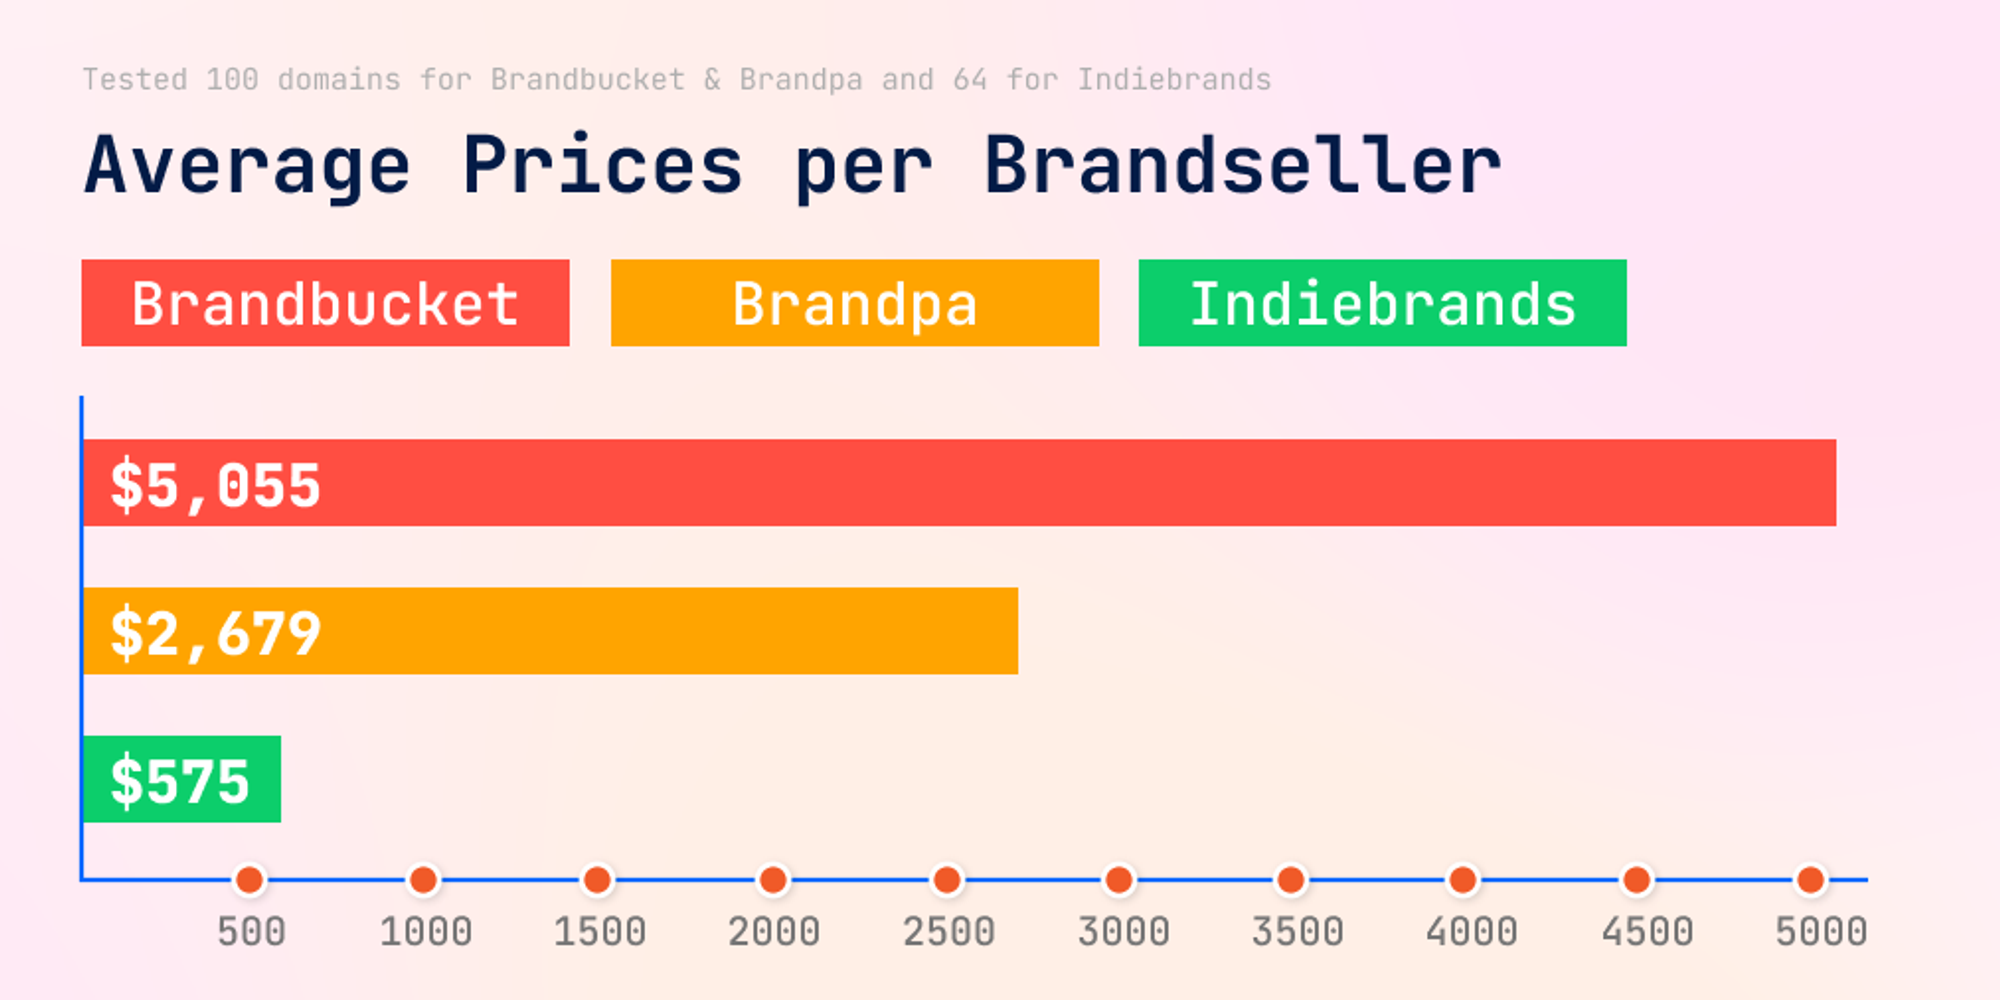 Brandbucket vs Brandps vs Indiebrands pricing. You can find all the data in this spreadsheet: 